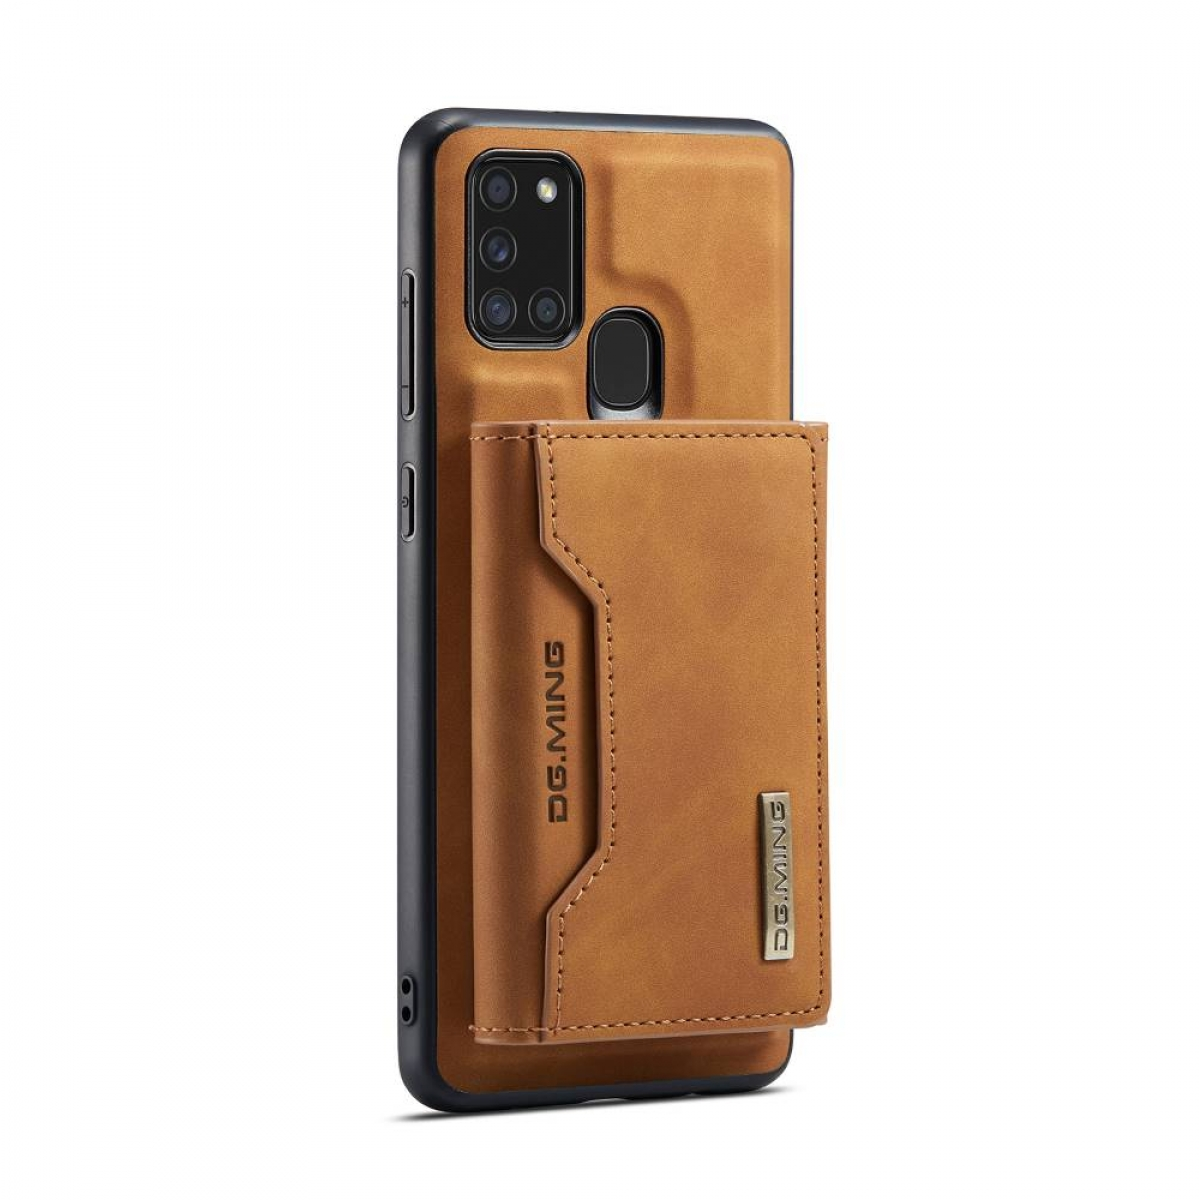 DG MING M2 Braun Galaxy A21s, 2in1, Backcover, Samsung